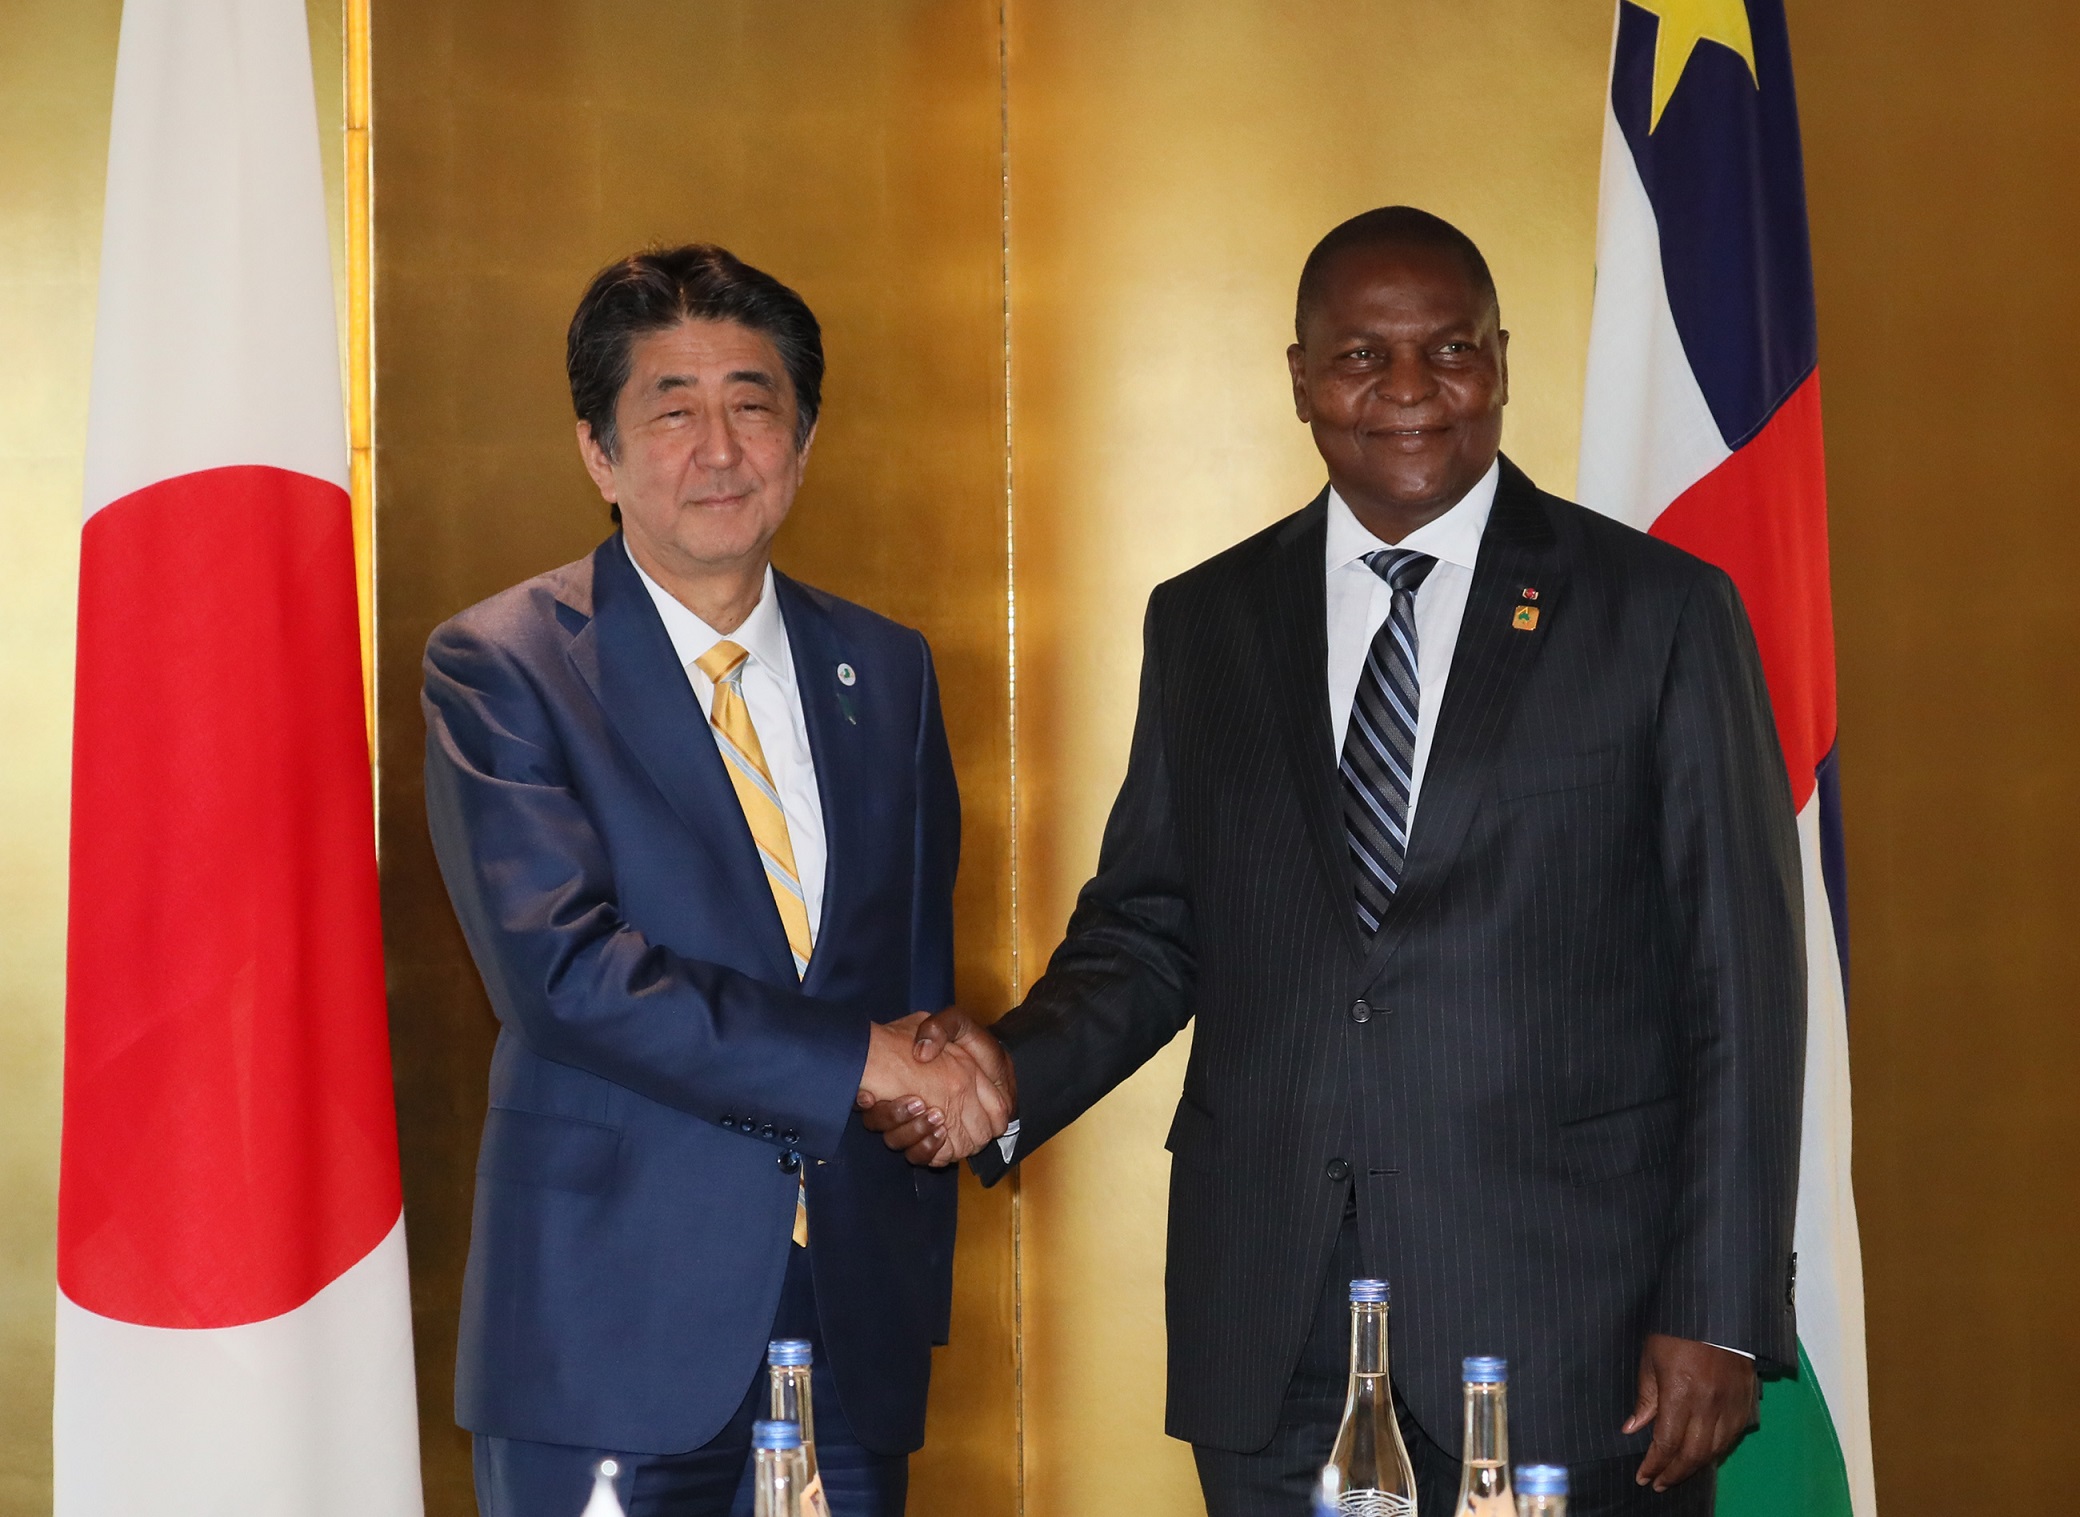 Photograph of the Japan-Central African Republic Summit Meeting